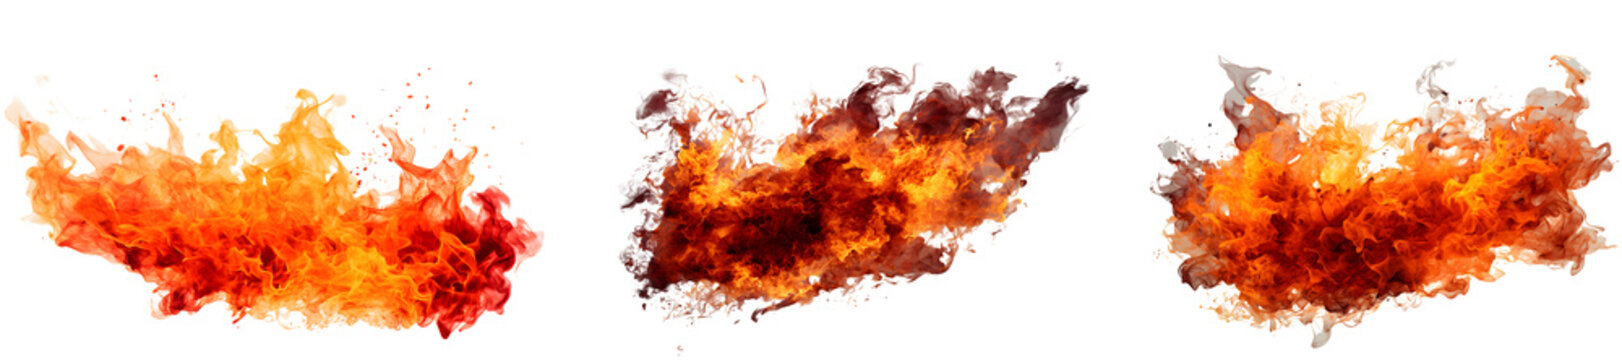 Set of explosions fire splatters isolated on transparent background 